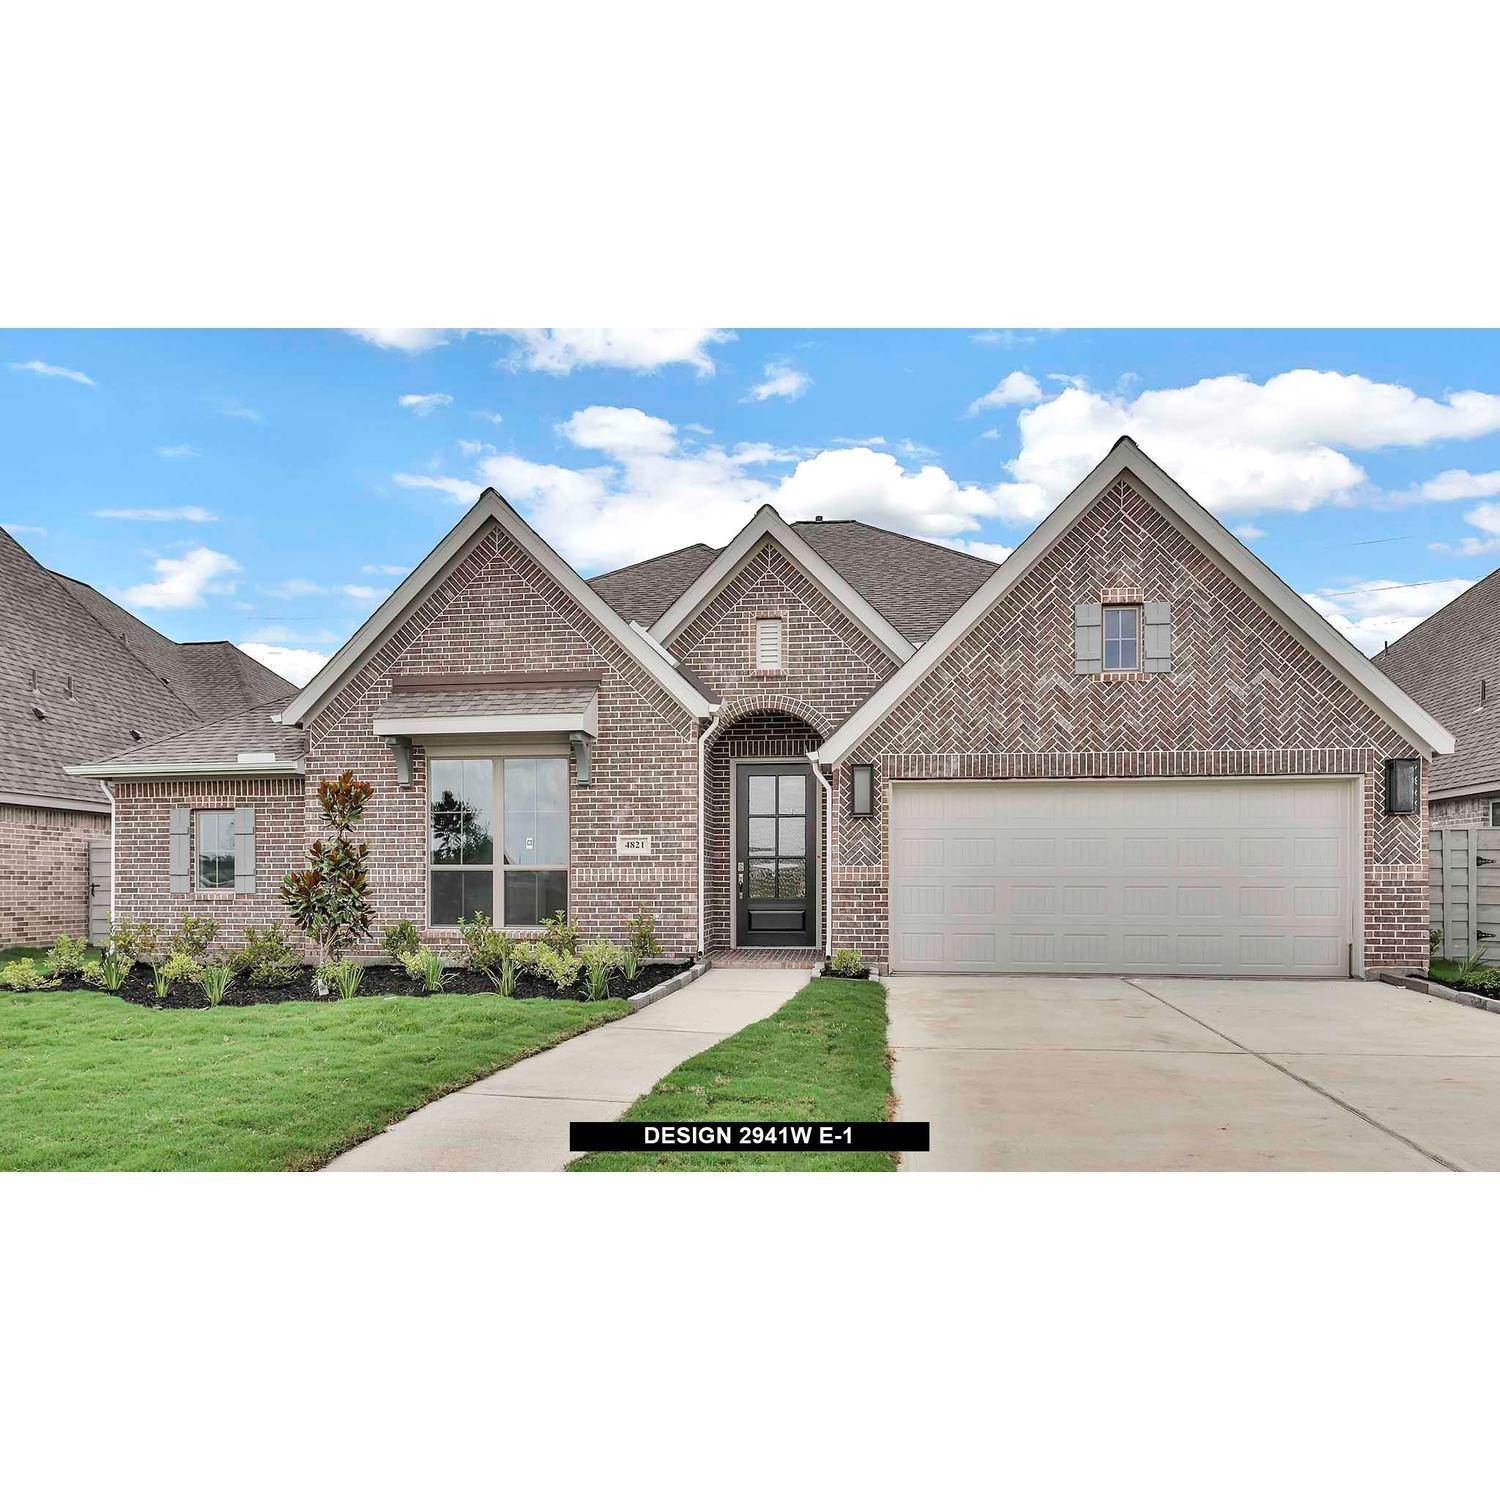 Single Family for Sale at Manvel, TX 77578